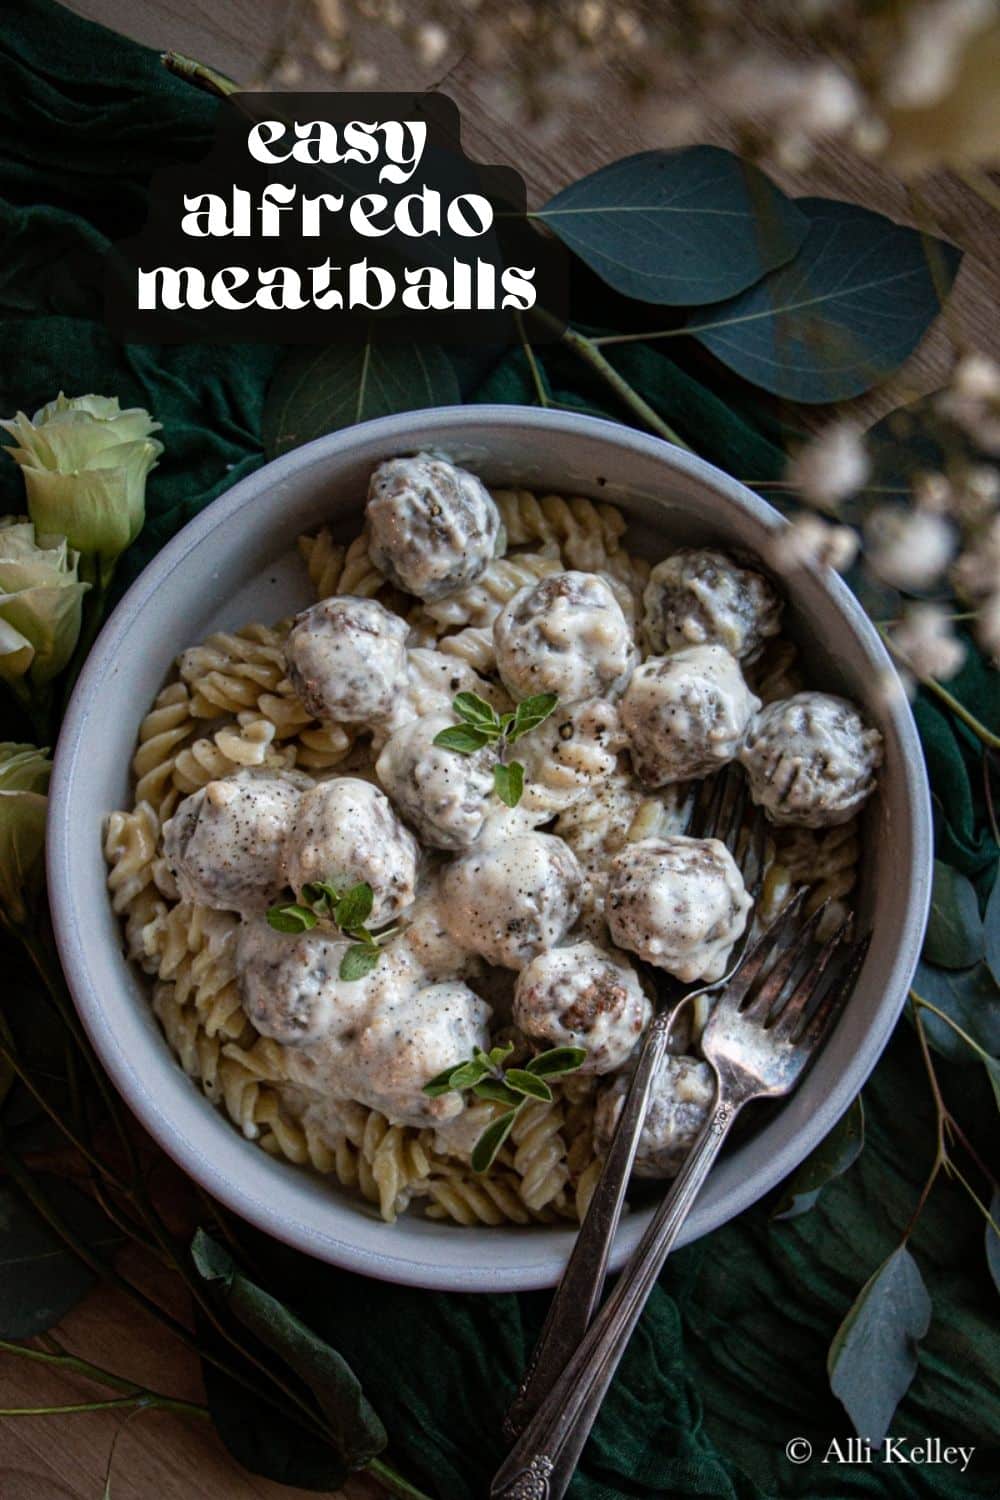 Tender meatballs smothered in a creamy and delicious Alfredo sauce - what could be better?! My alfredo meatballs recipe is the perfect dinner for any occasion. Meatballs with alfredo sauce are super quick and easy, yet oh so delicious. It's a winning combination that everyone will enjoy!